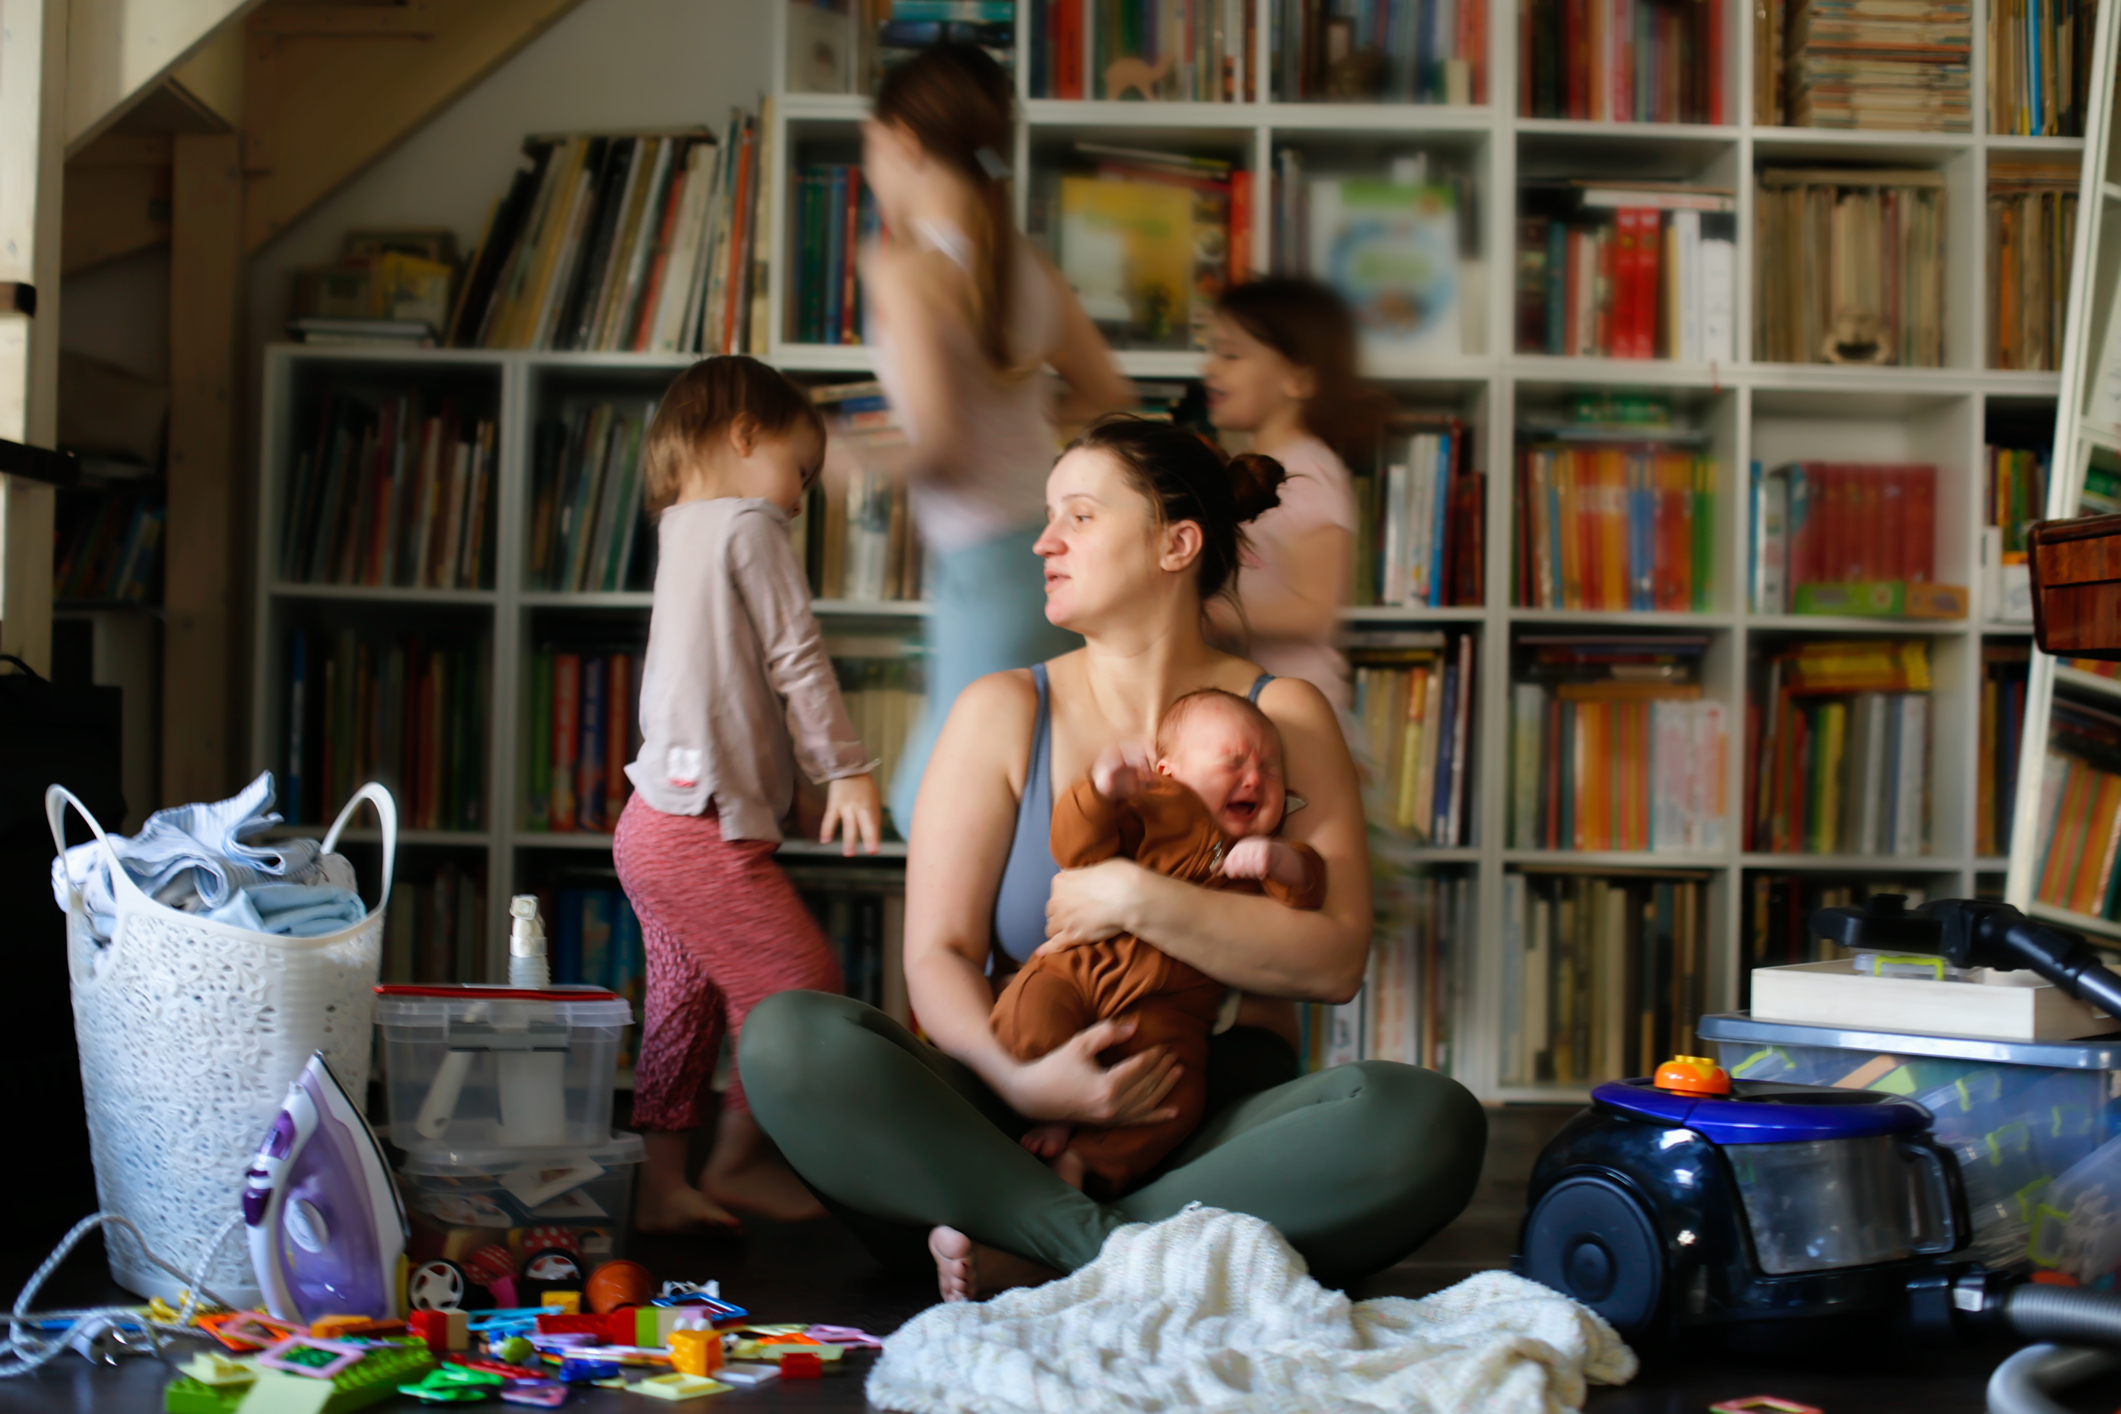 A mother holds a baby and sits among toys as another child and adult move in the background, depicting a lively family scene